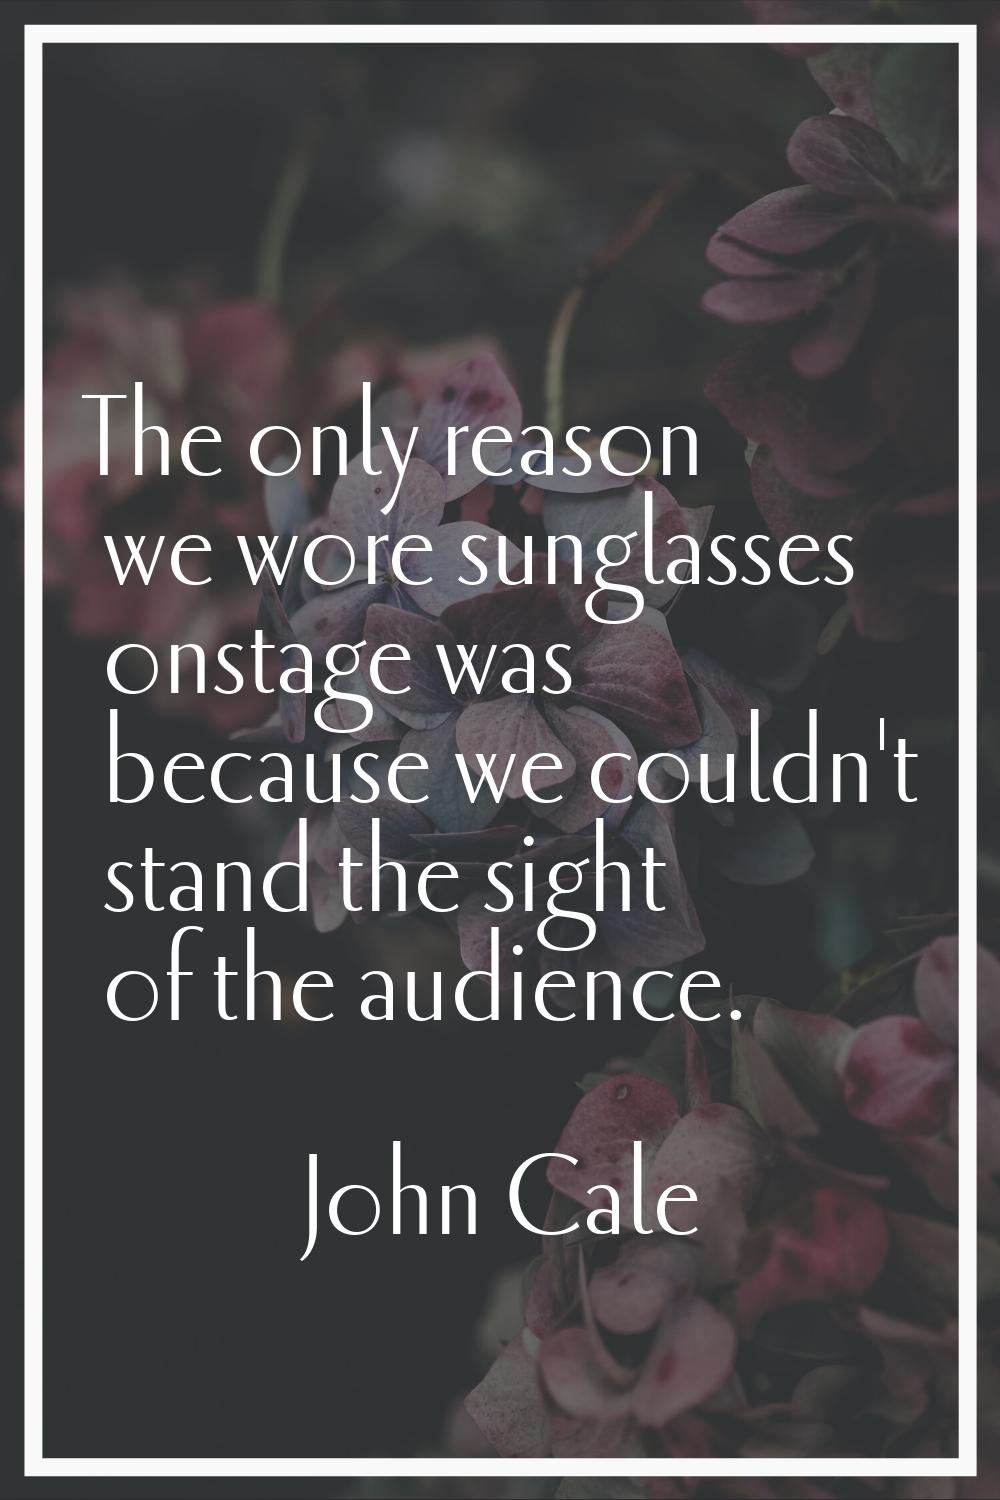 The only reason we wore sunglasses onstage was because we couldn't stand the sight of the audience.